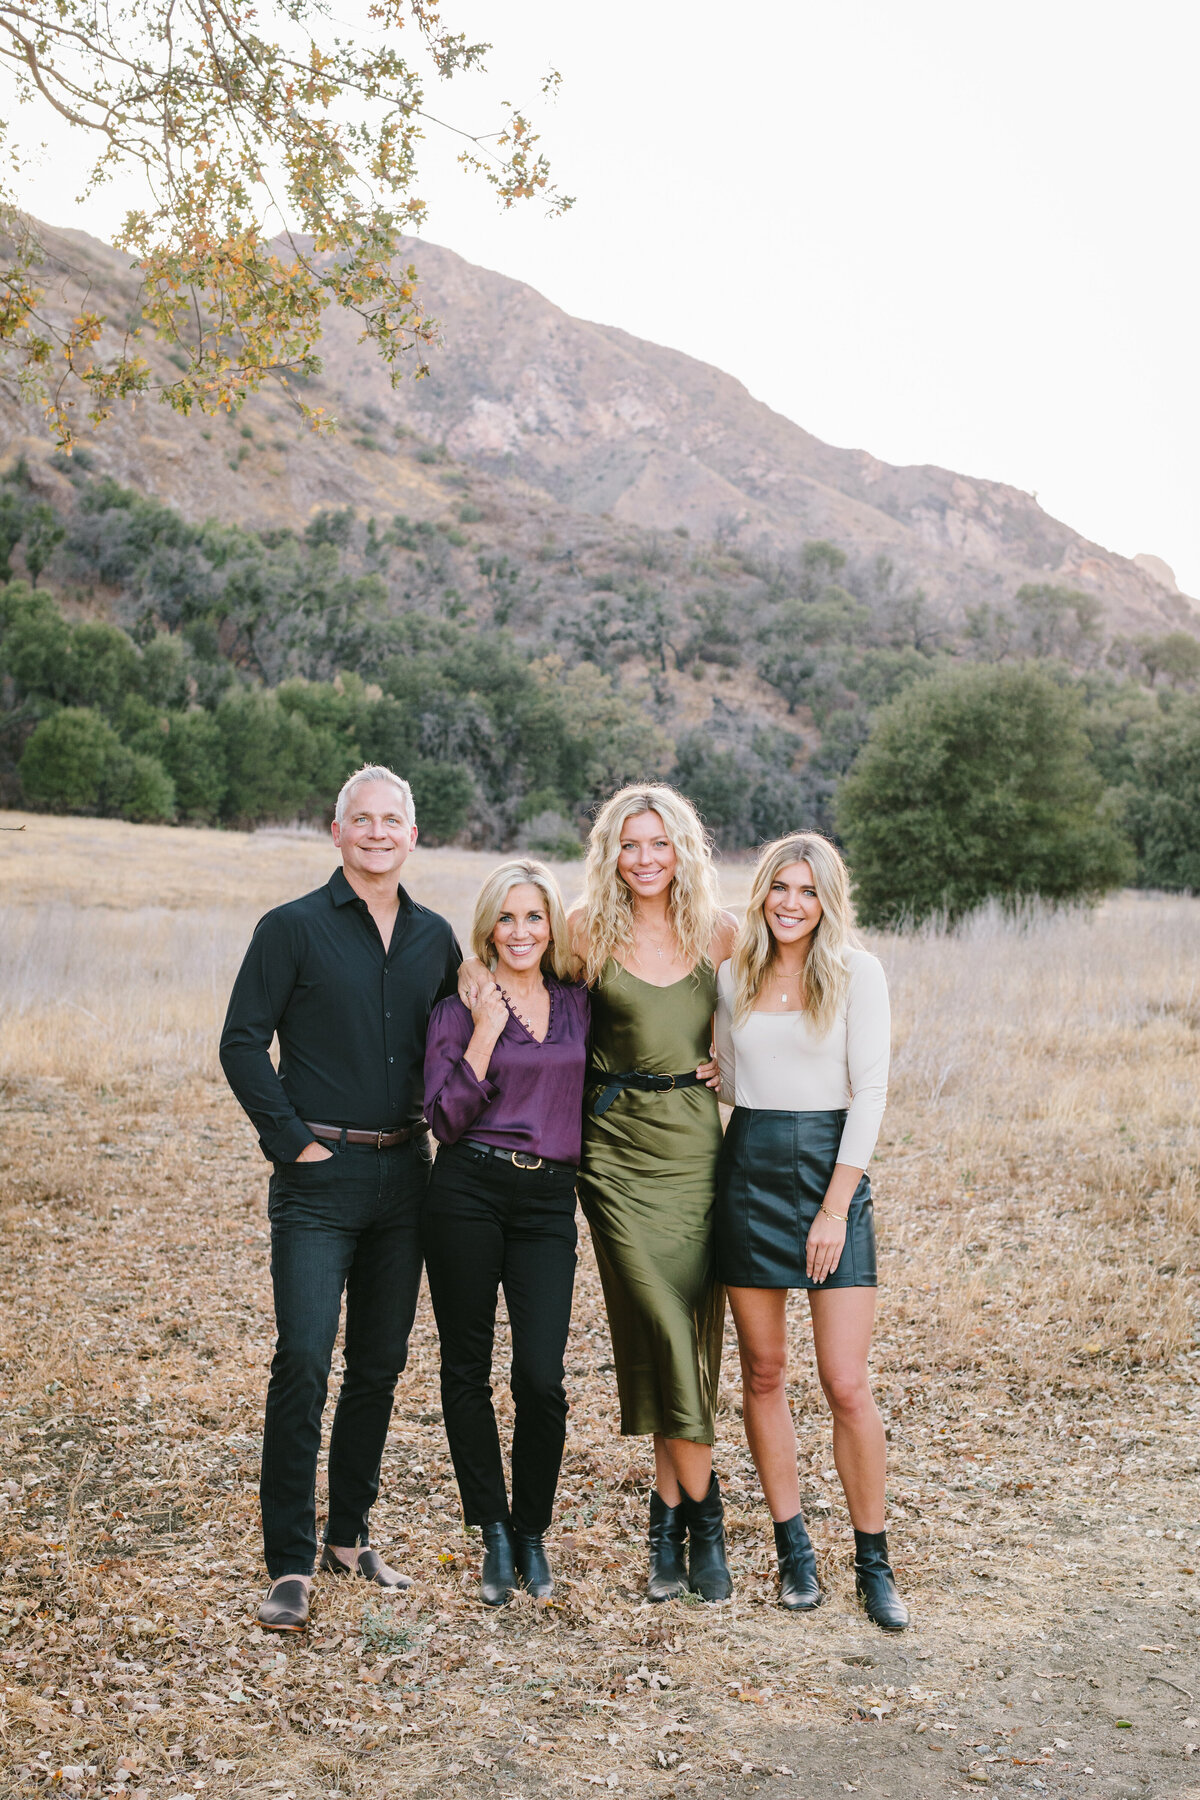 Best California and Texas Family Photographer-Jodee Debes Photography-285